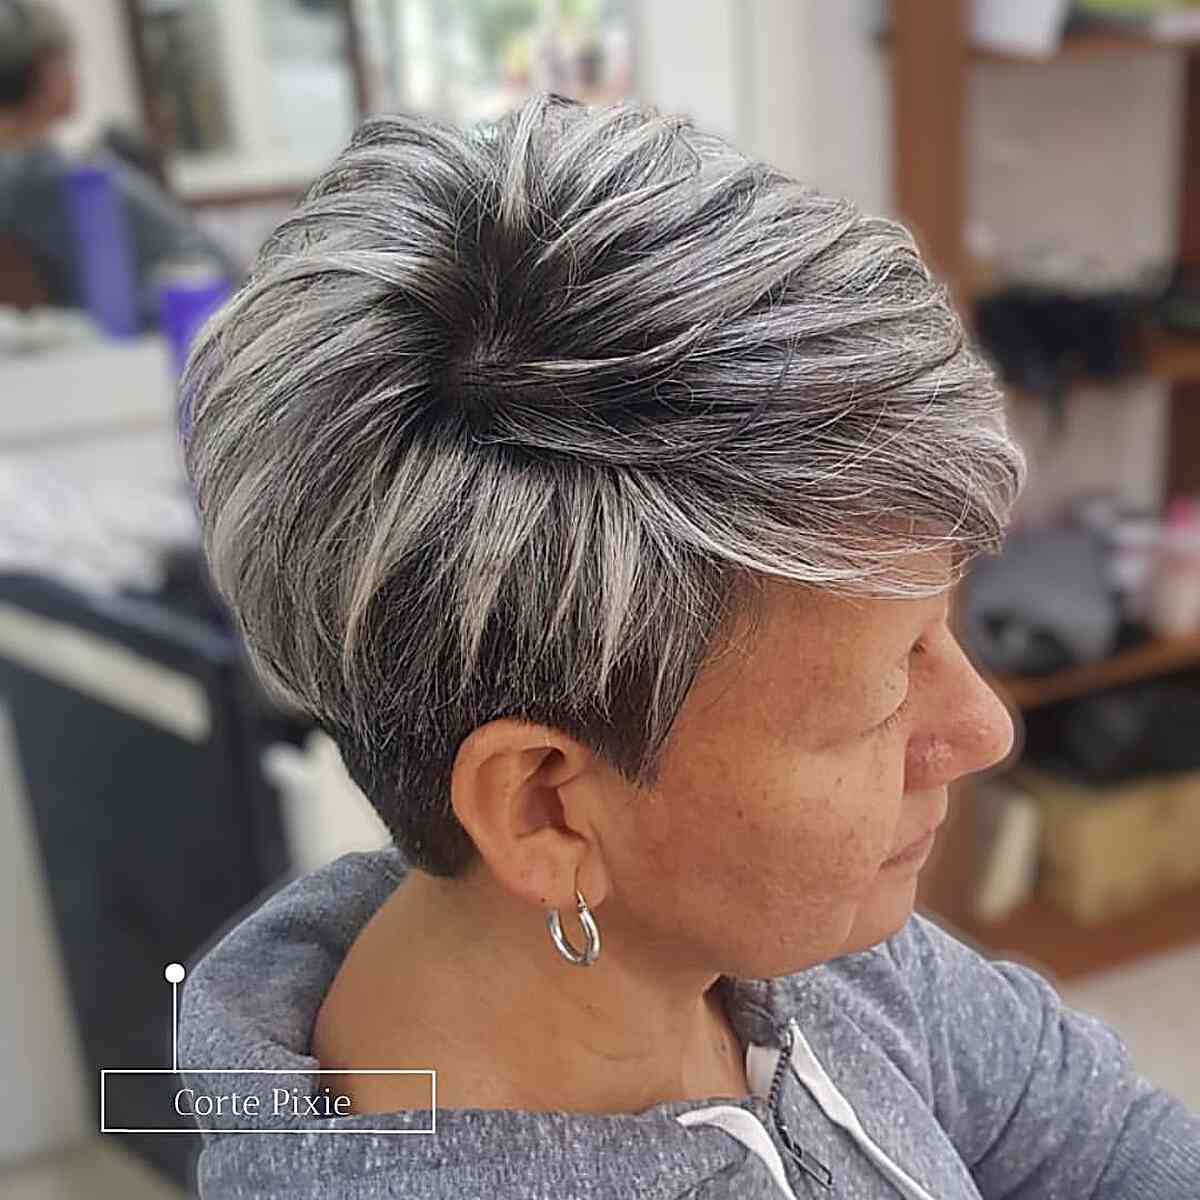 Salt-and-Pepper Pixie with Choppy Layers for woman over 60 years old